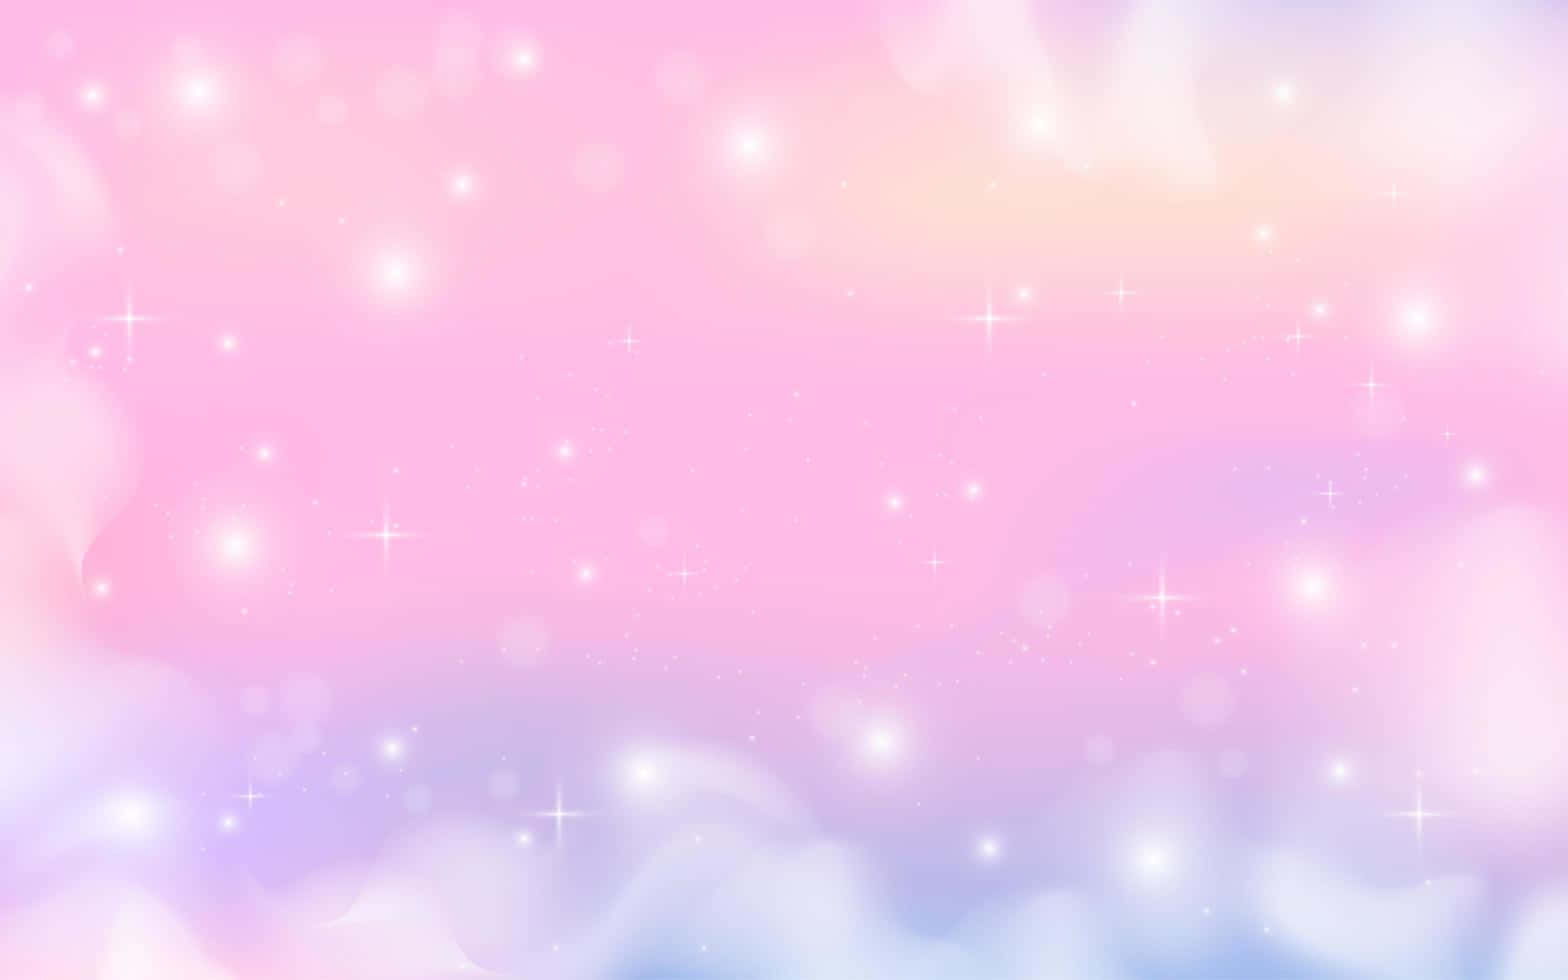 A Pink And Blue Background With Stars And Sparkles